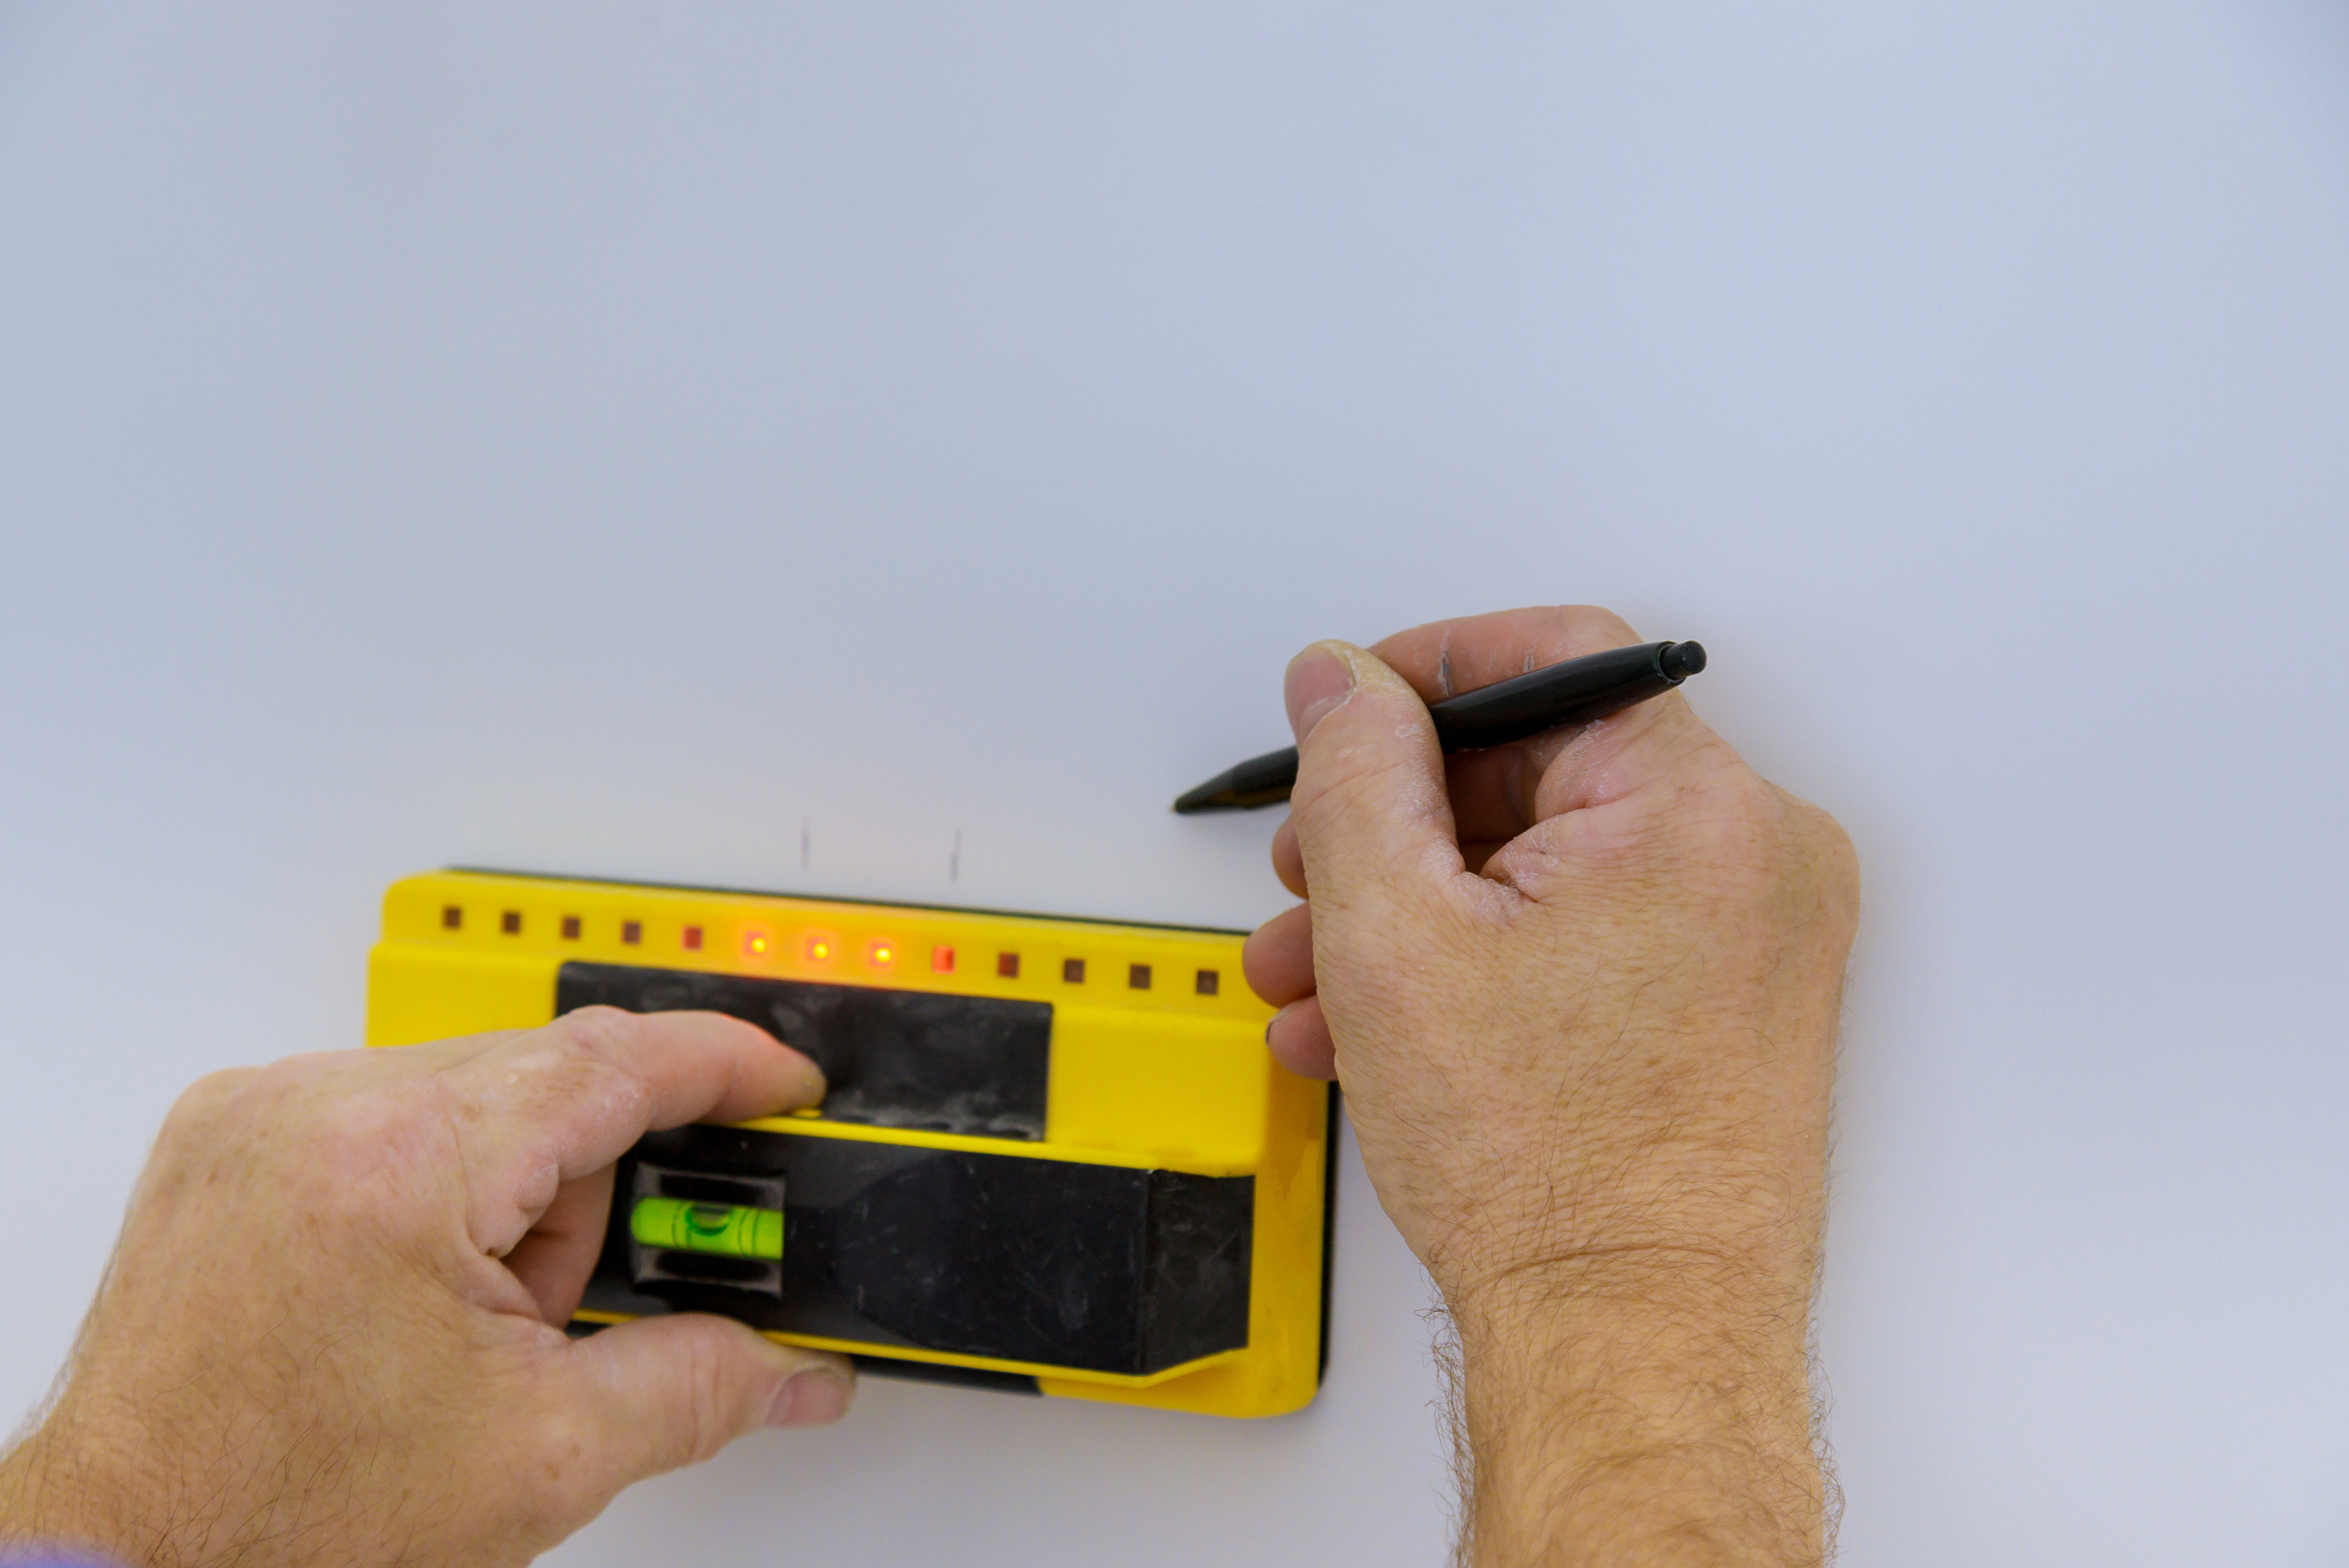 Hands of a person using a stud finder and pen to mark the wall for studs.